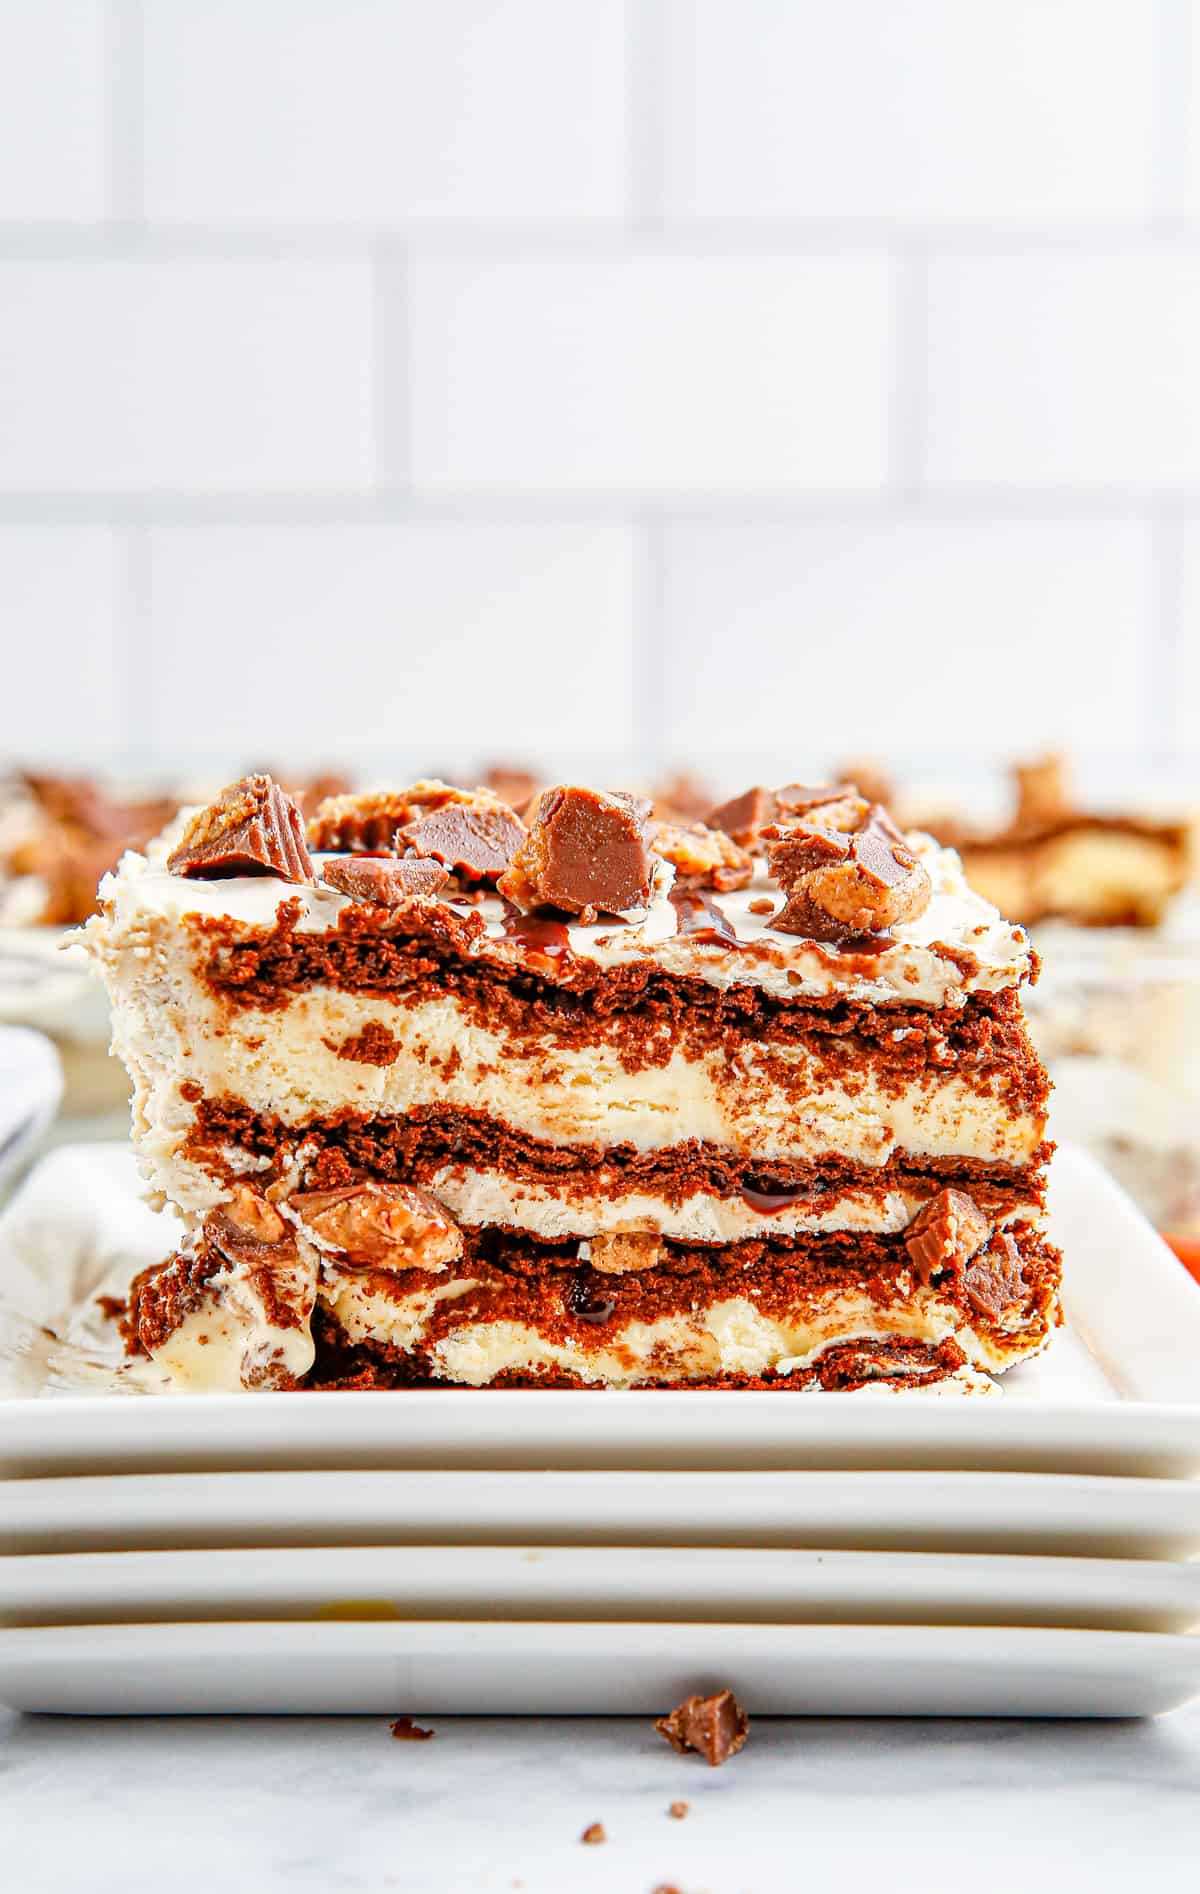 One slice of the Reese's Ice Cream Cake on stacked square white plates.